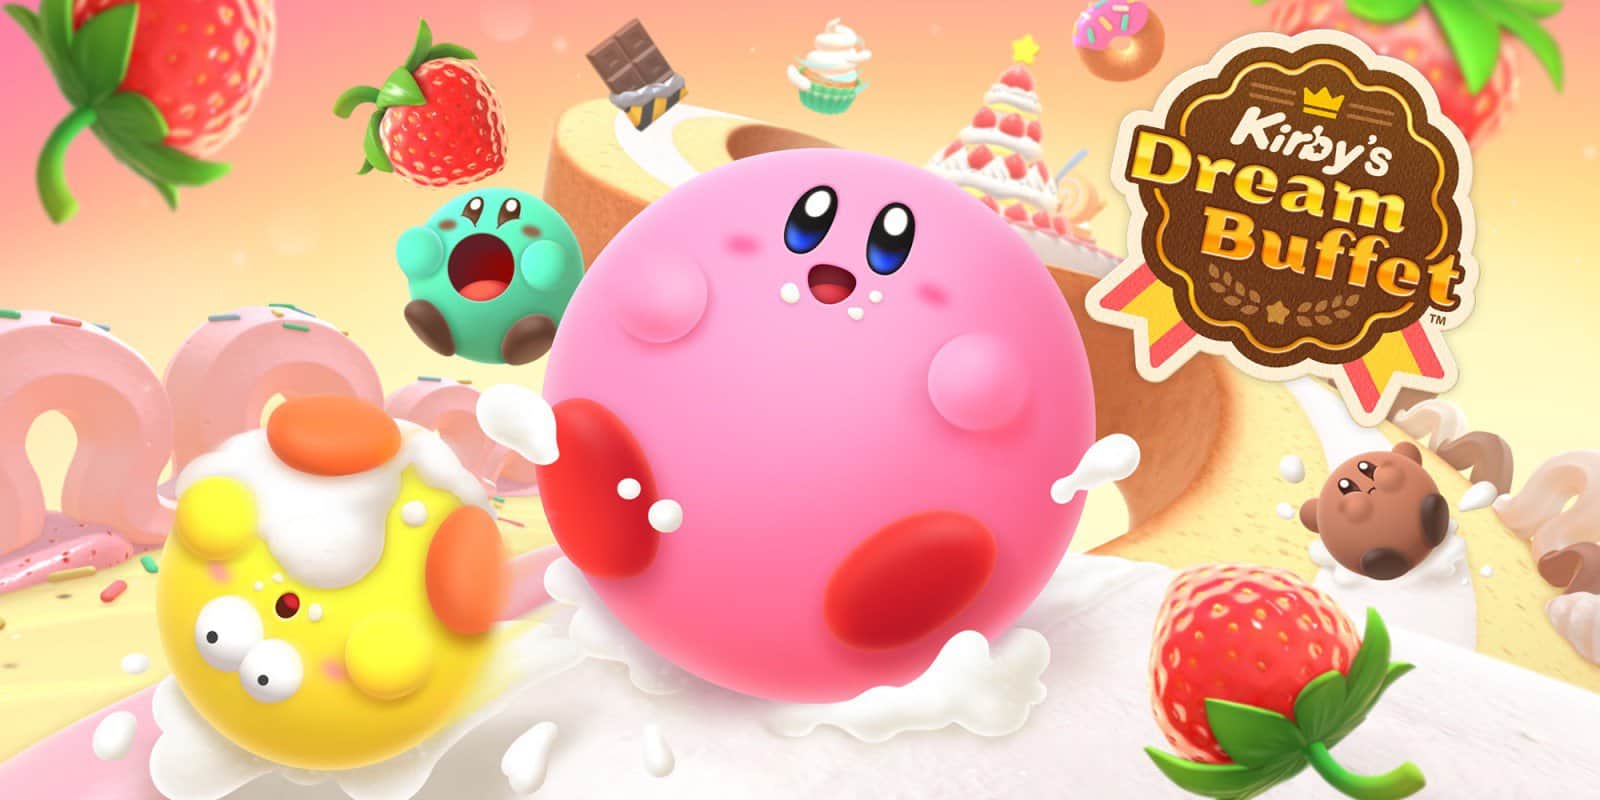 UPDATED: Kirby’s Dream Buffet Release Date & Details